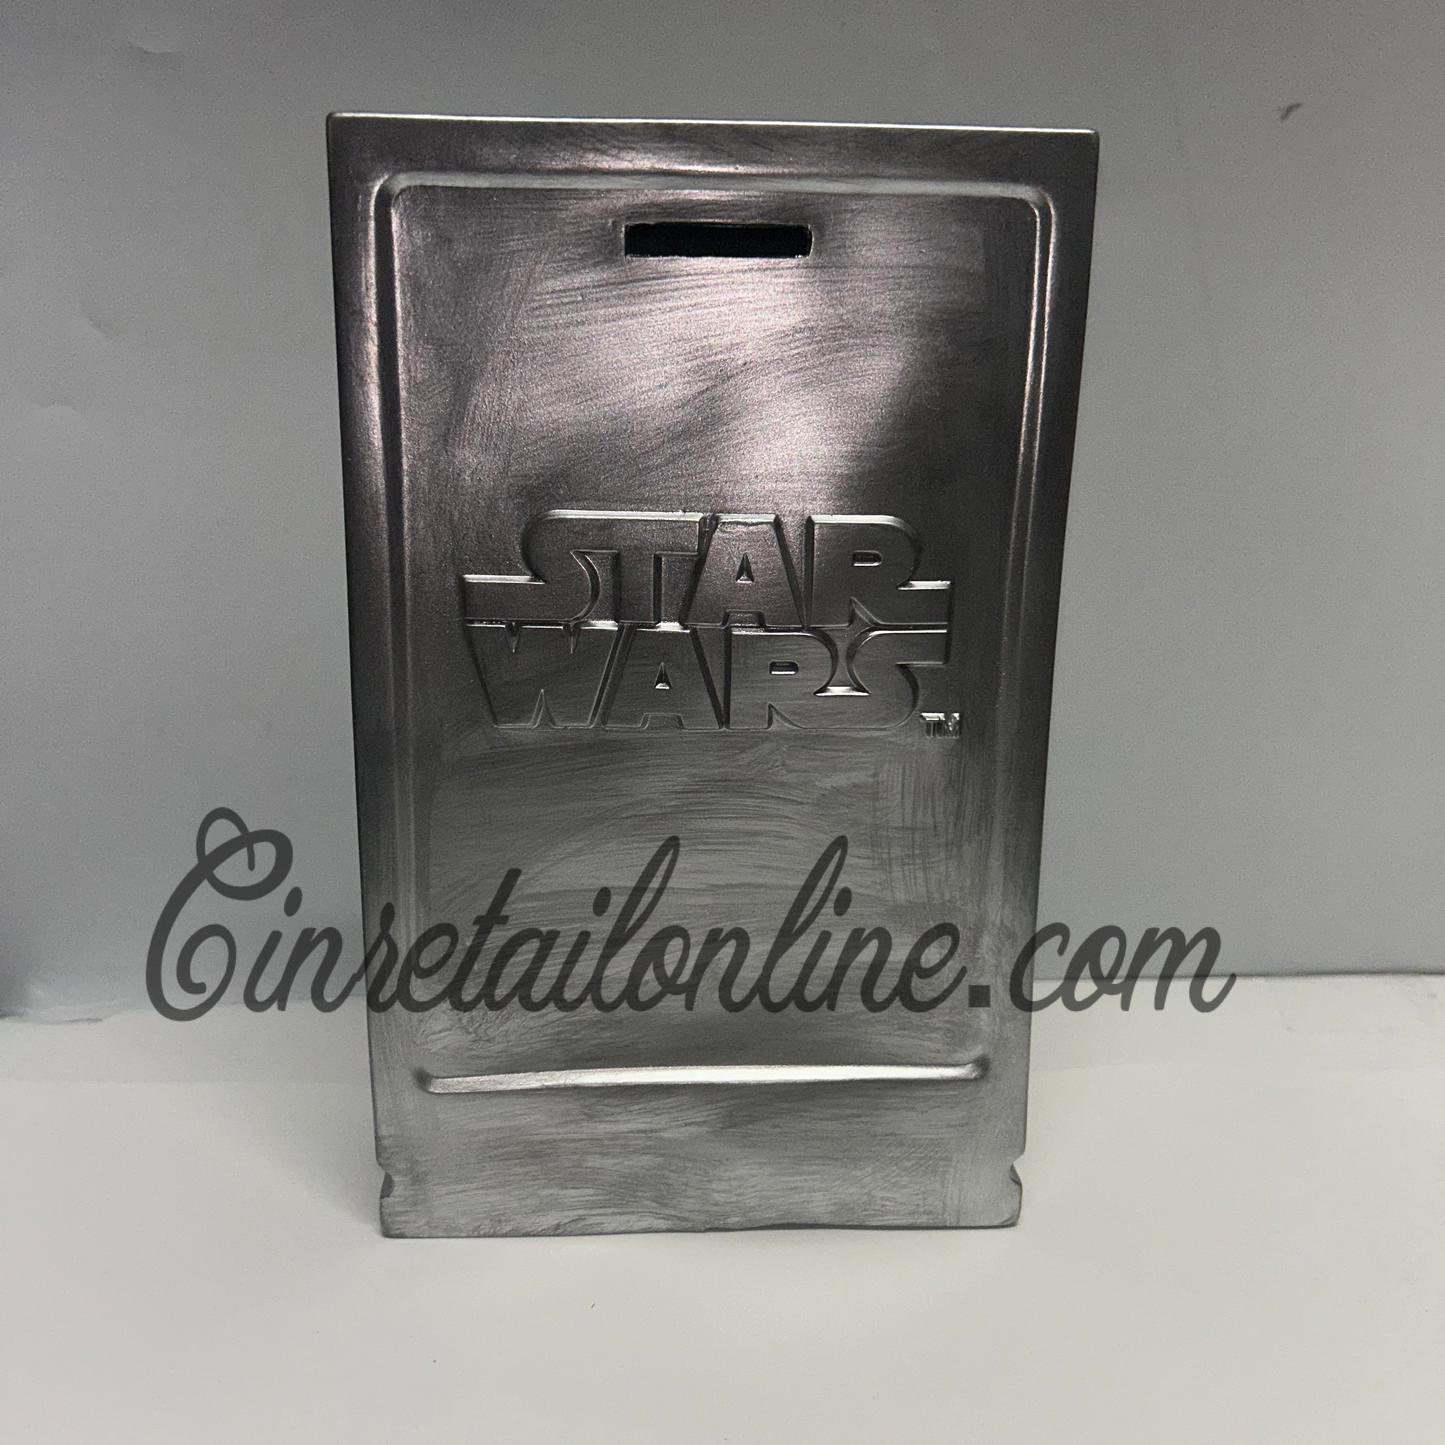 Star Wars Han Solo in Carbonite coin bank